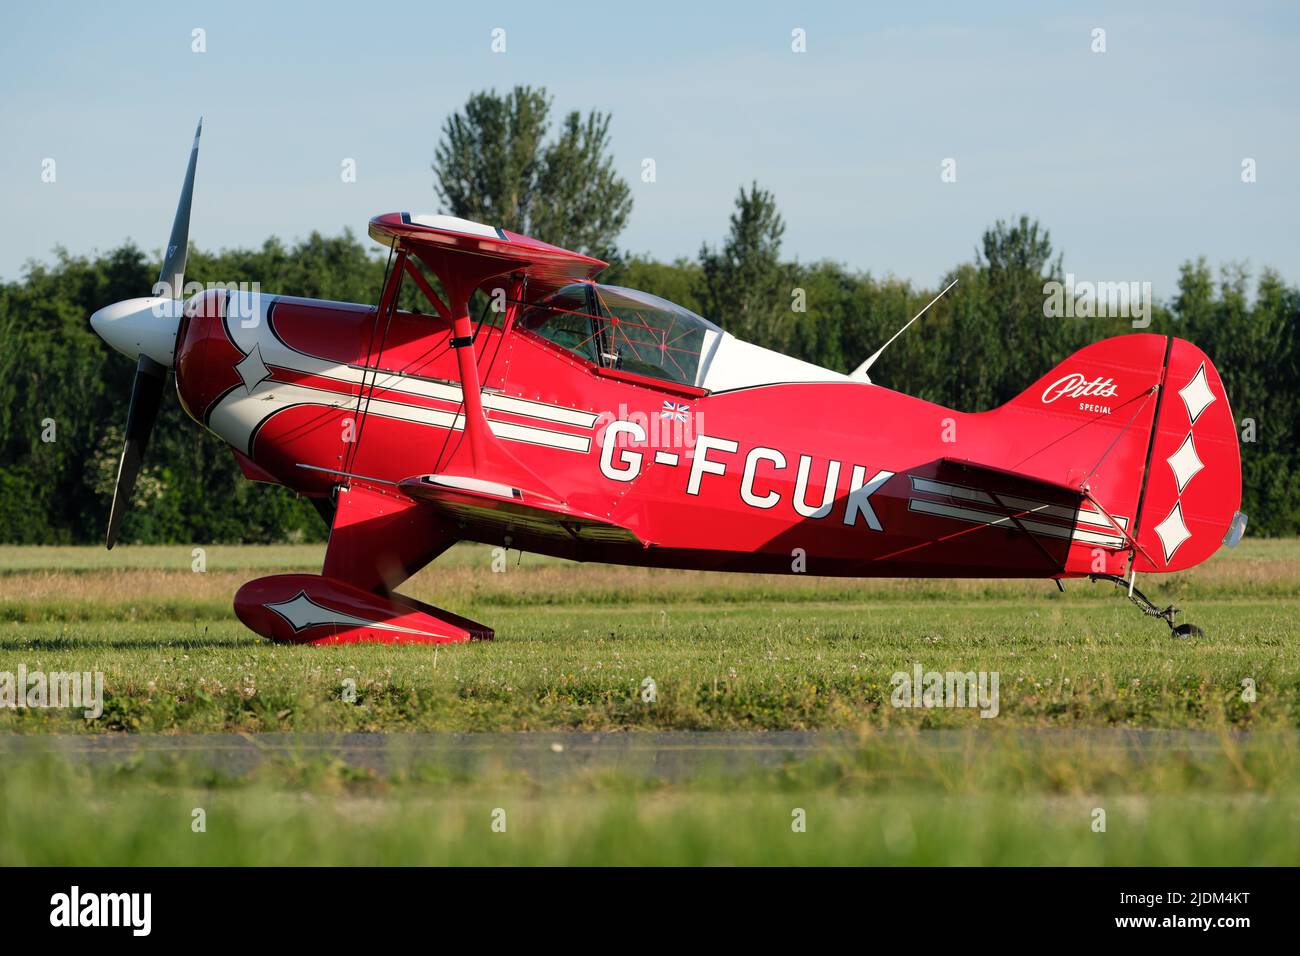 Pitts S-1C Special single seat aerobatic biplane registered as G-FCUK seen in June 2022 UK Stock Photo